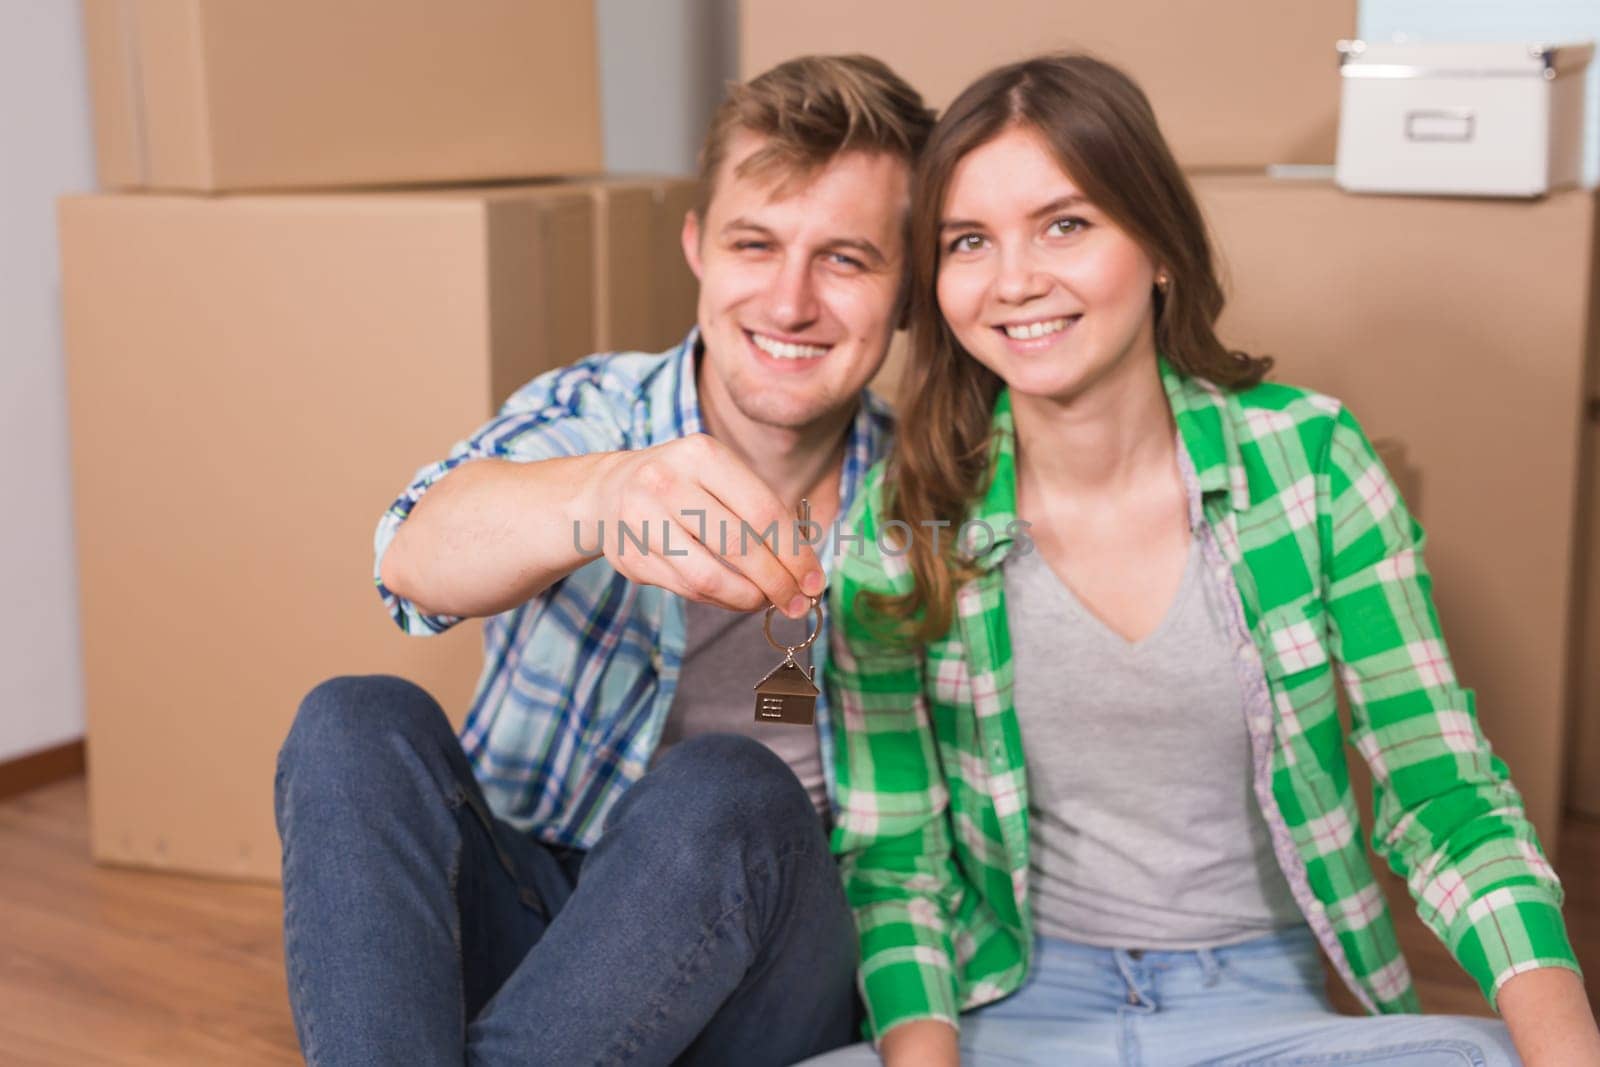 Happy young couple sitting on floor near boxes. Young family moving to new home. Woman and man showing keys and smiling at camera.